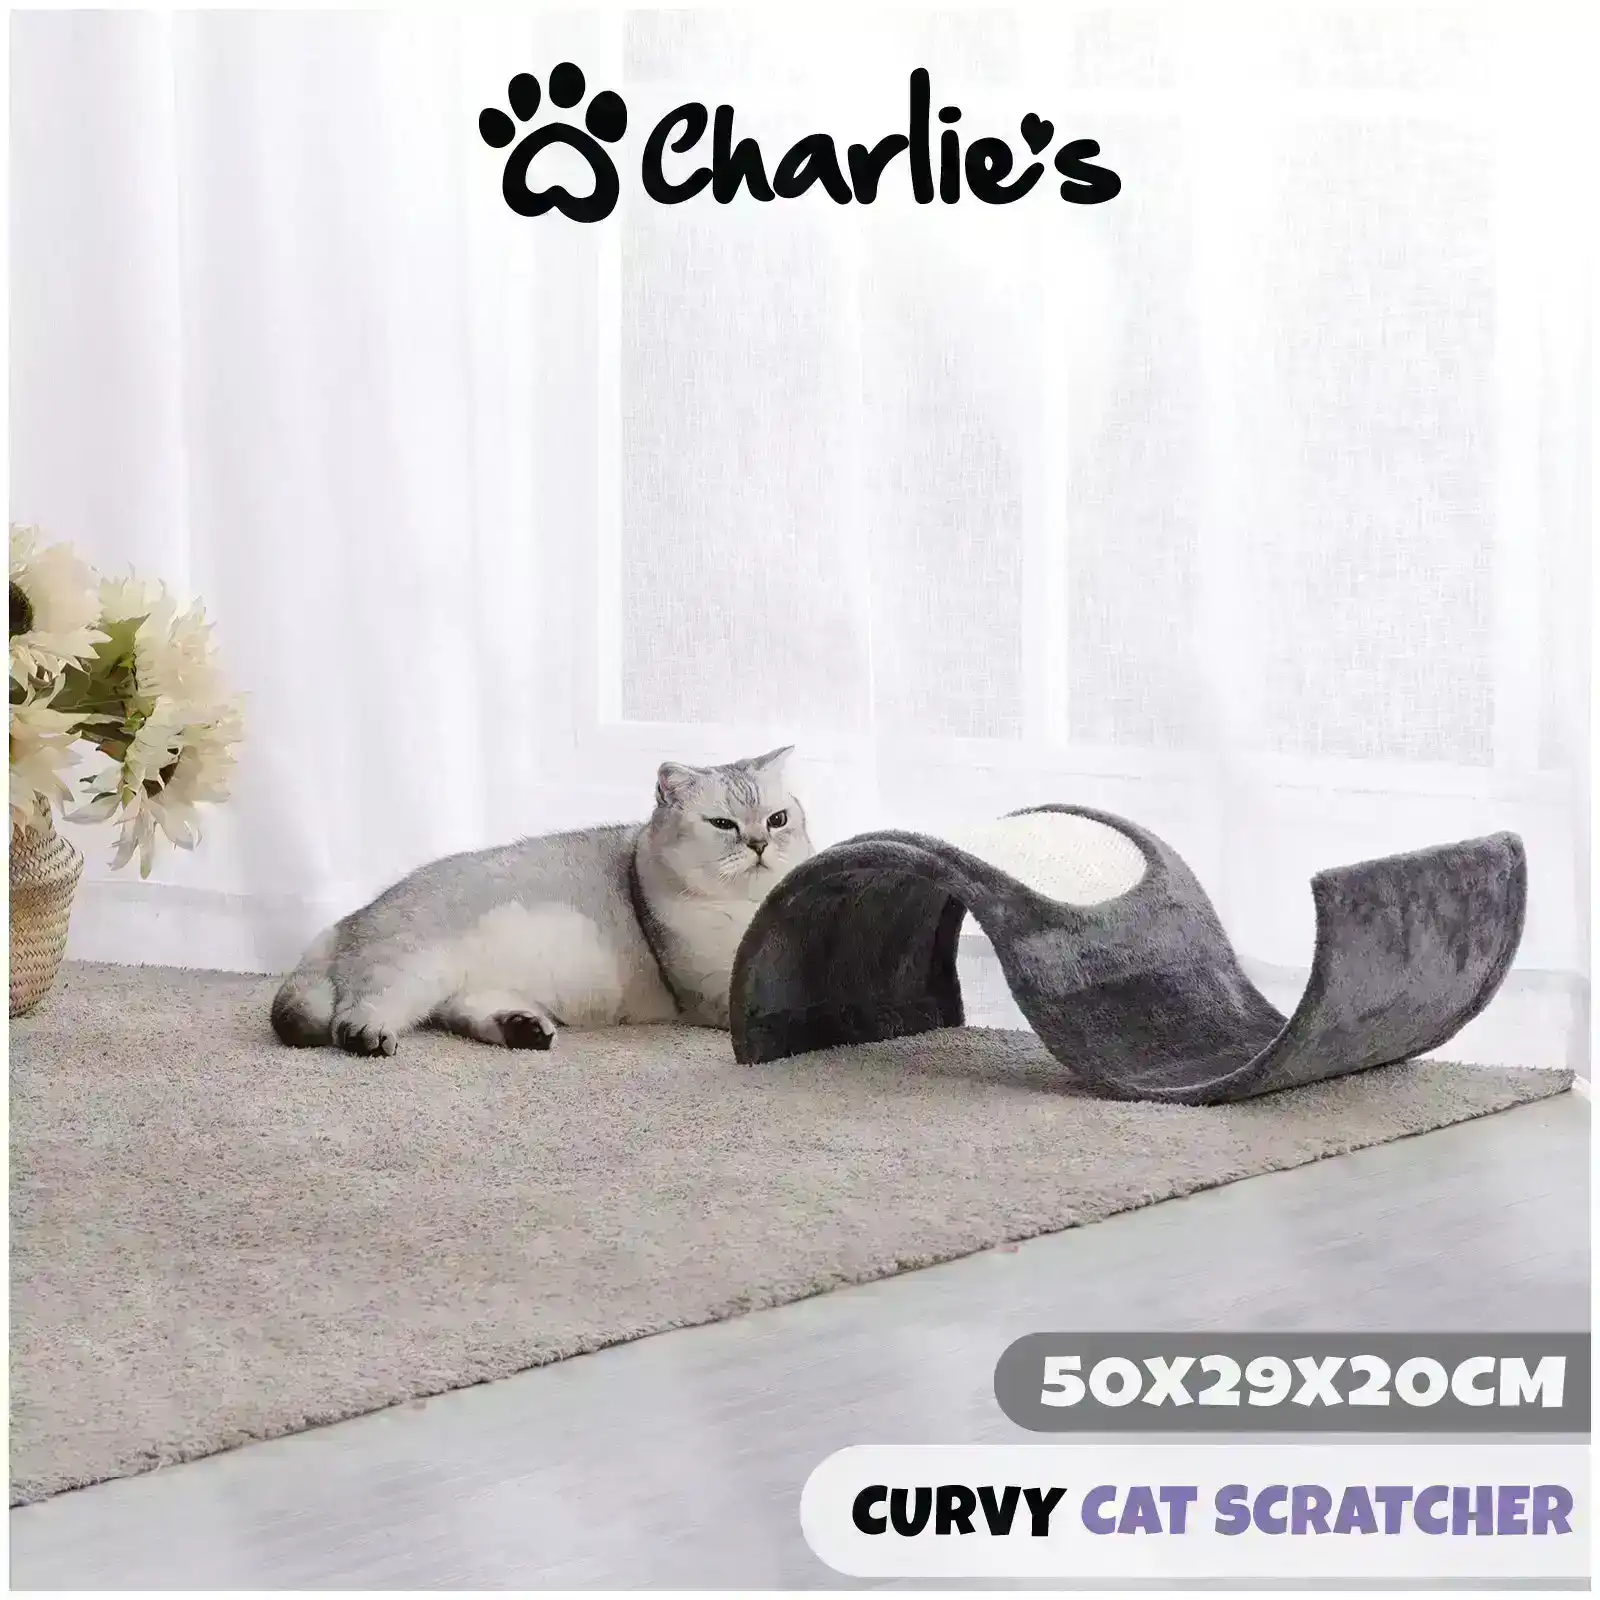 Charlie's Curvy Cat Scratcher in Sisal and Carpet Charcoal